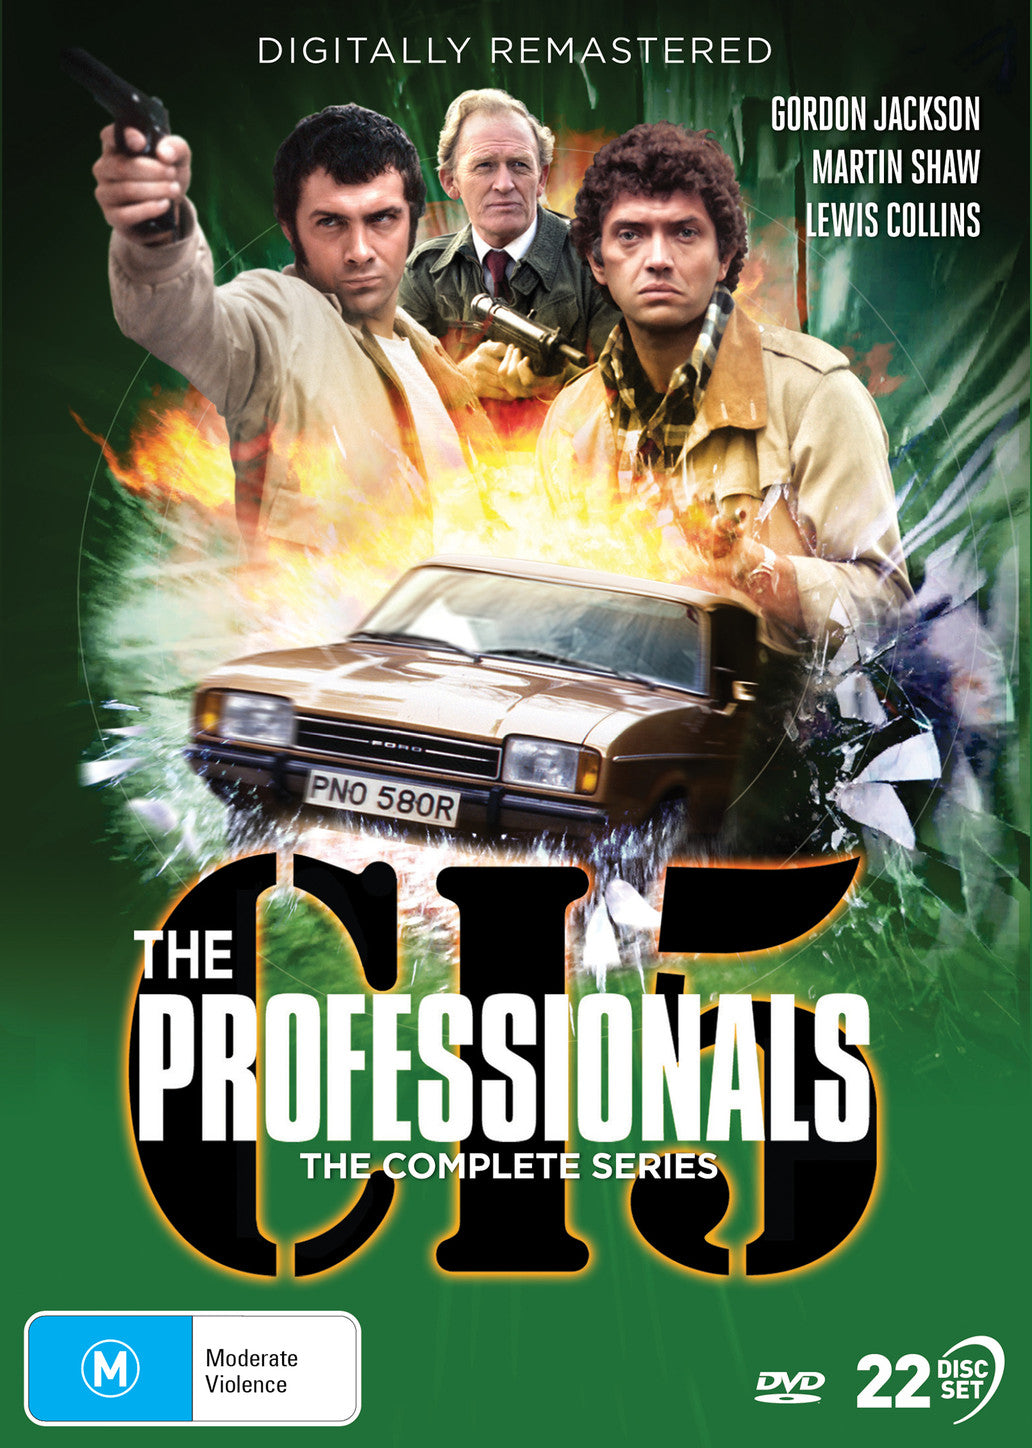 THE PROFESSIONALS: THE COMPLETE SERIES